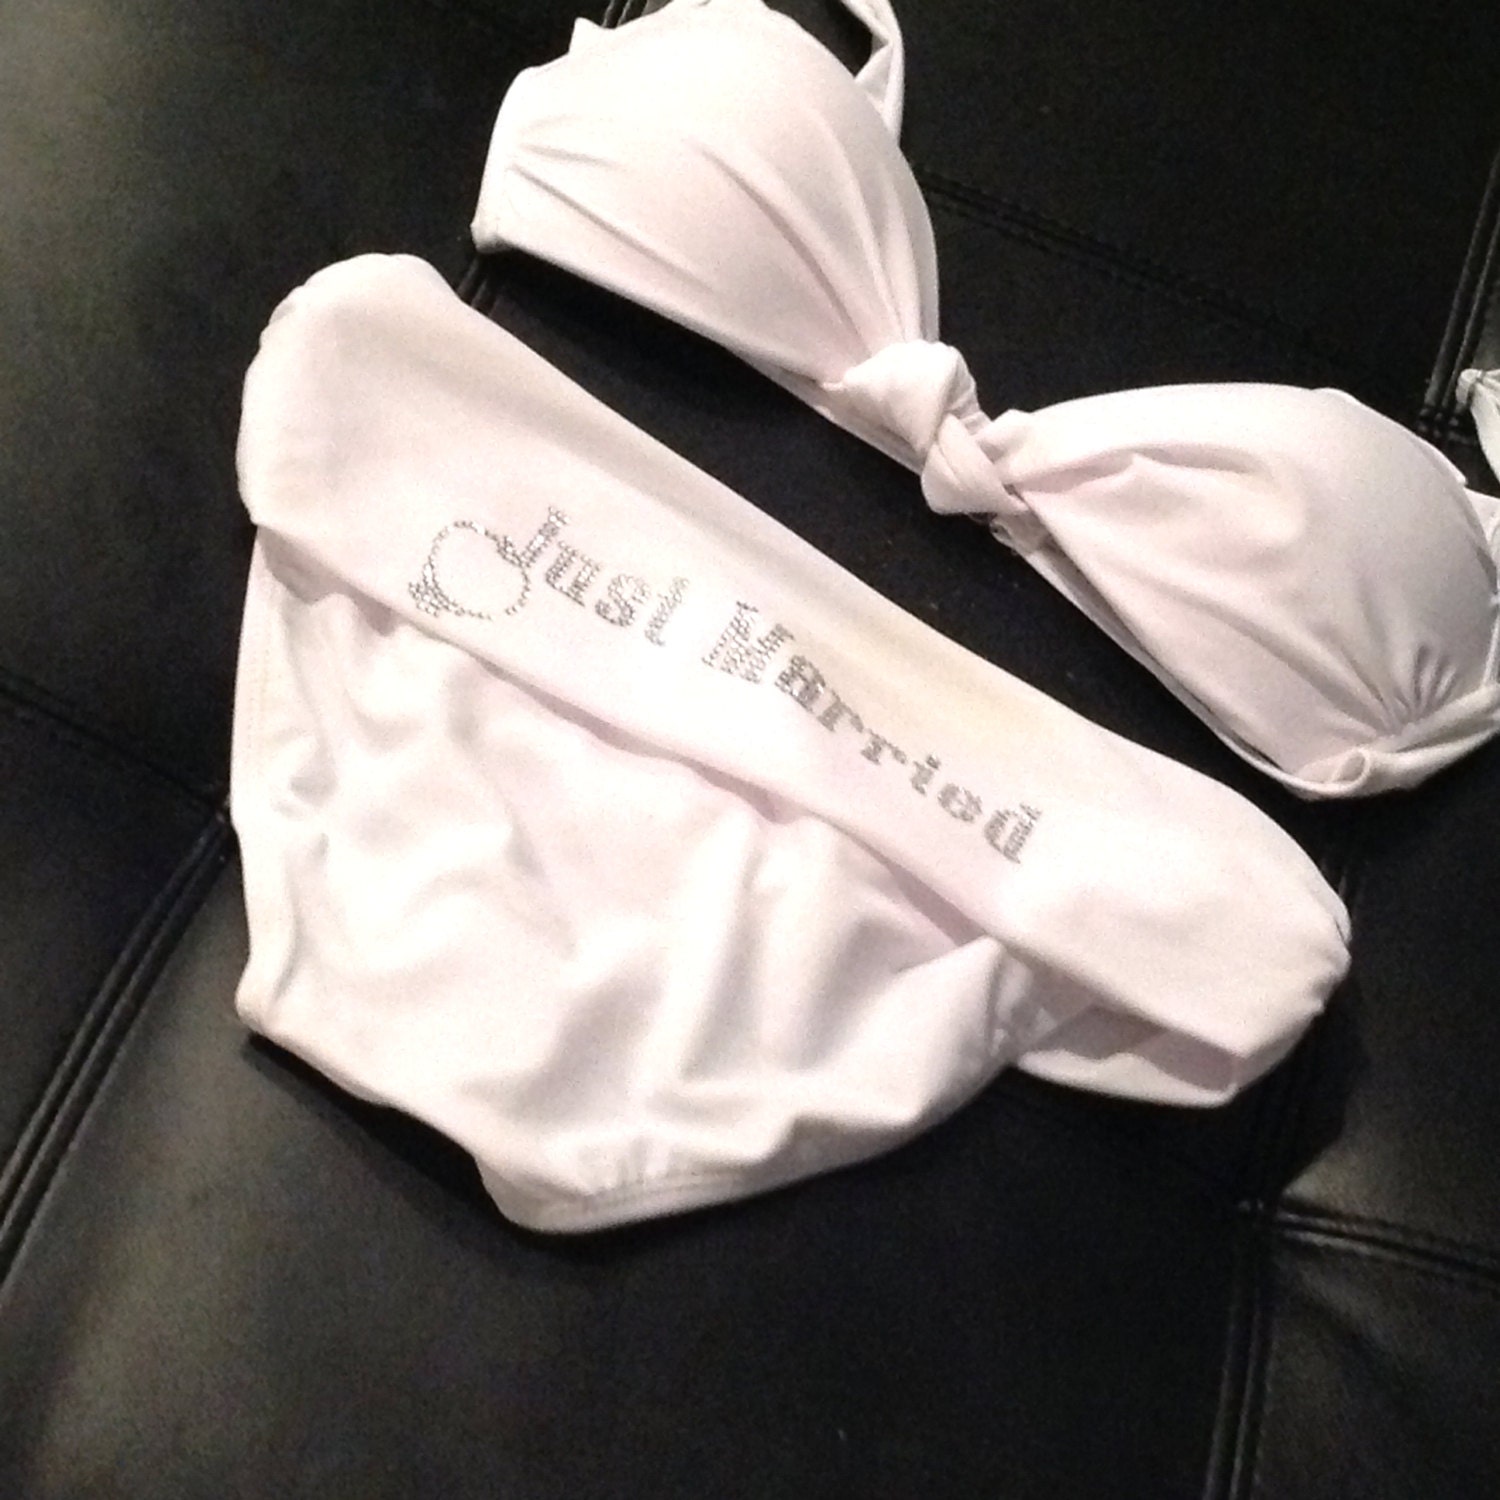 just married bikini next day delivery